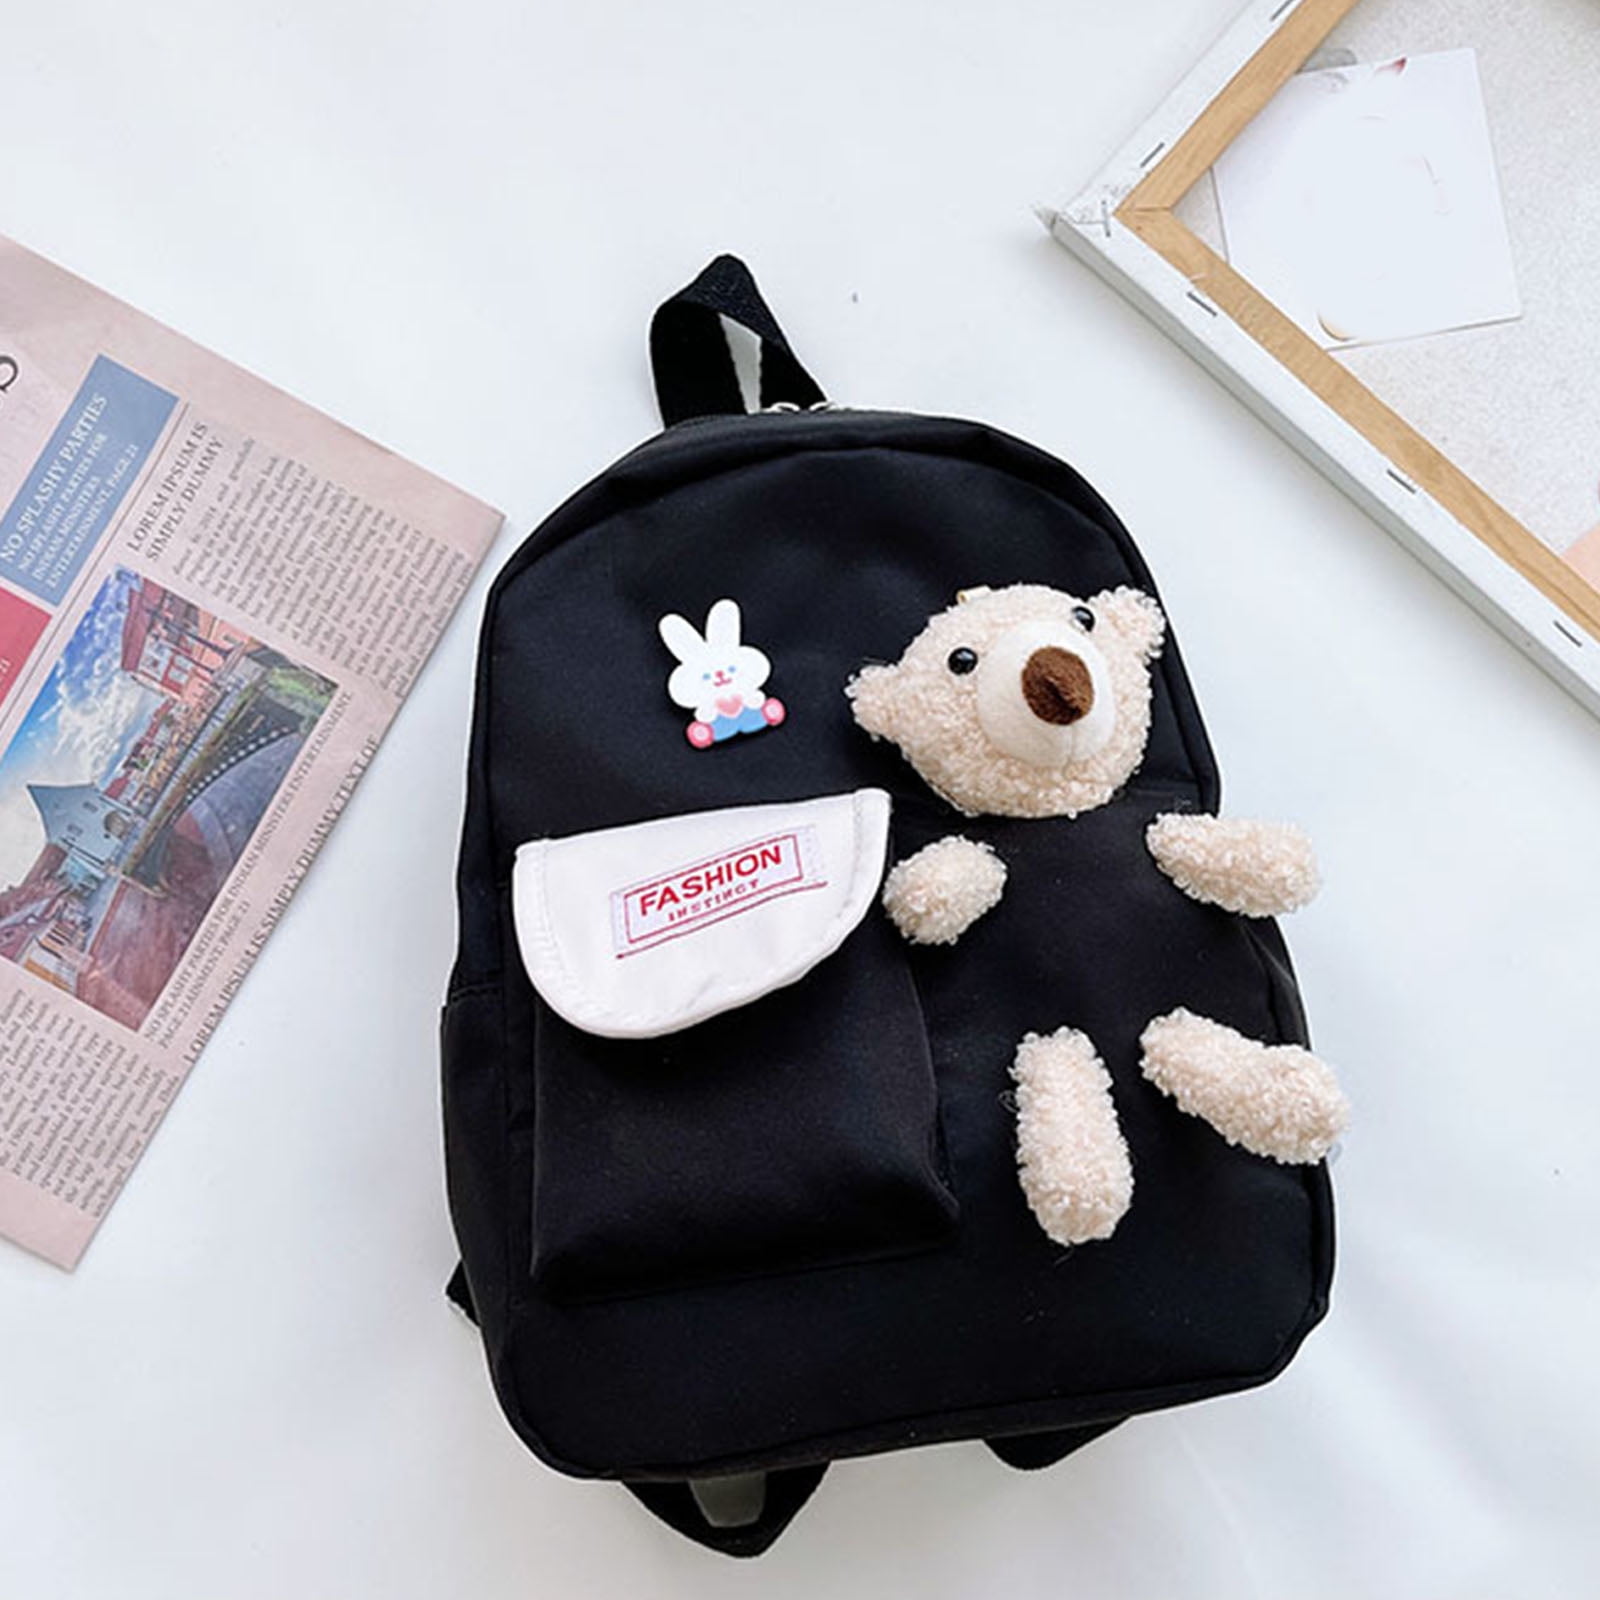 Teddy Bear Backpack For Girls And Boys, Cute Accessory With Cartoon  Character, Schoolbag For School And Kindergarten, 40 Cm, Birthday And  Christmas Gi